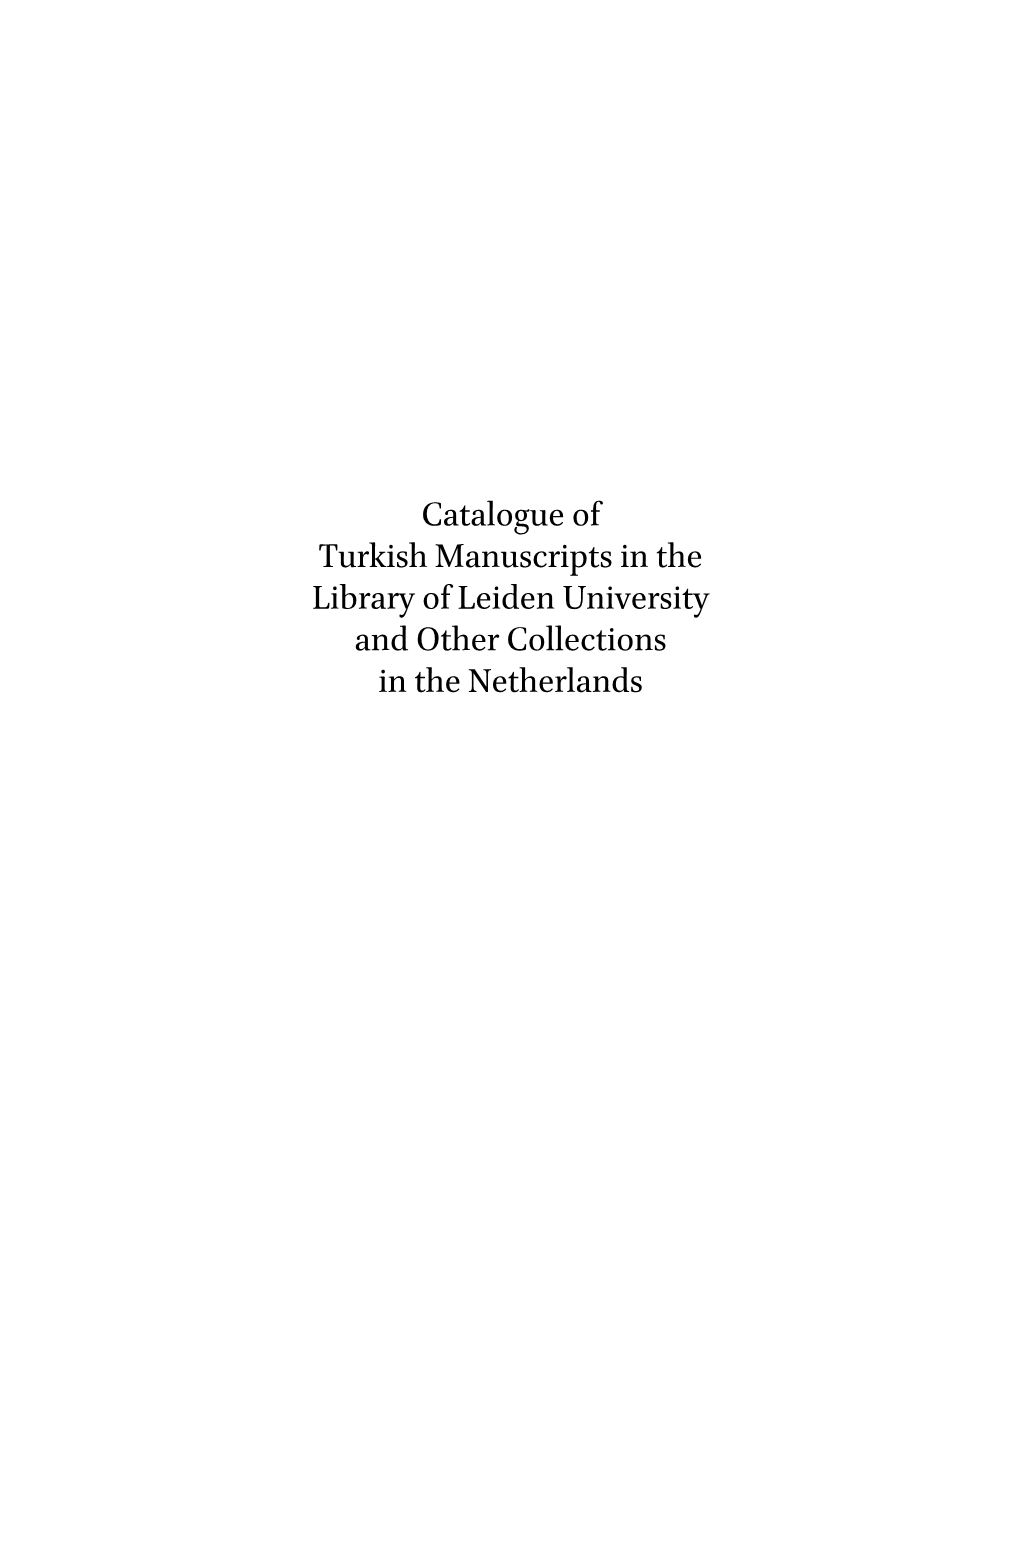 Catalogue of Turkish Manuscripts in the Library of Leiden University and Other Collections in the Netherlands Islamic Manuscripts and Books